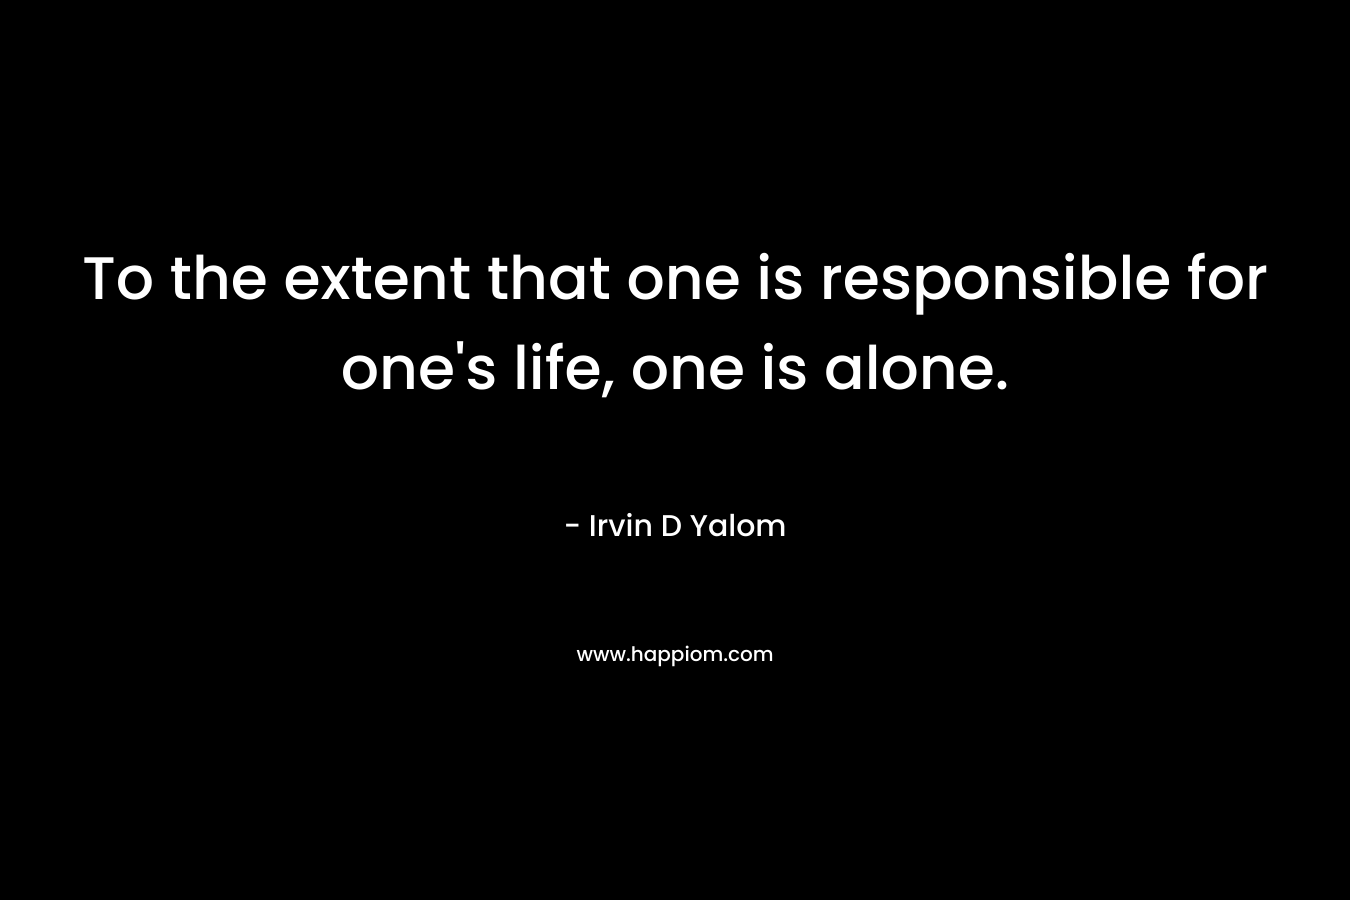 To the extent that one is responsible for one’s life, one is alone. – Irvin D Yalom